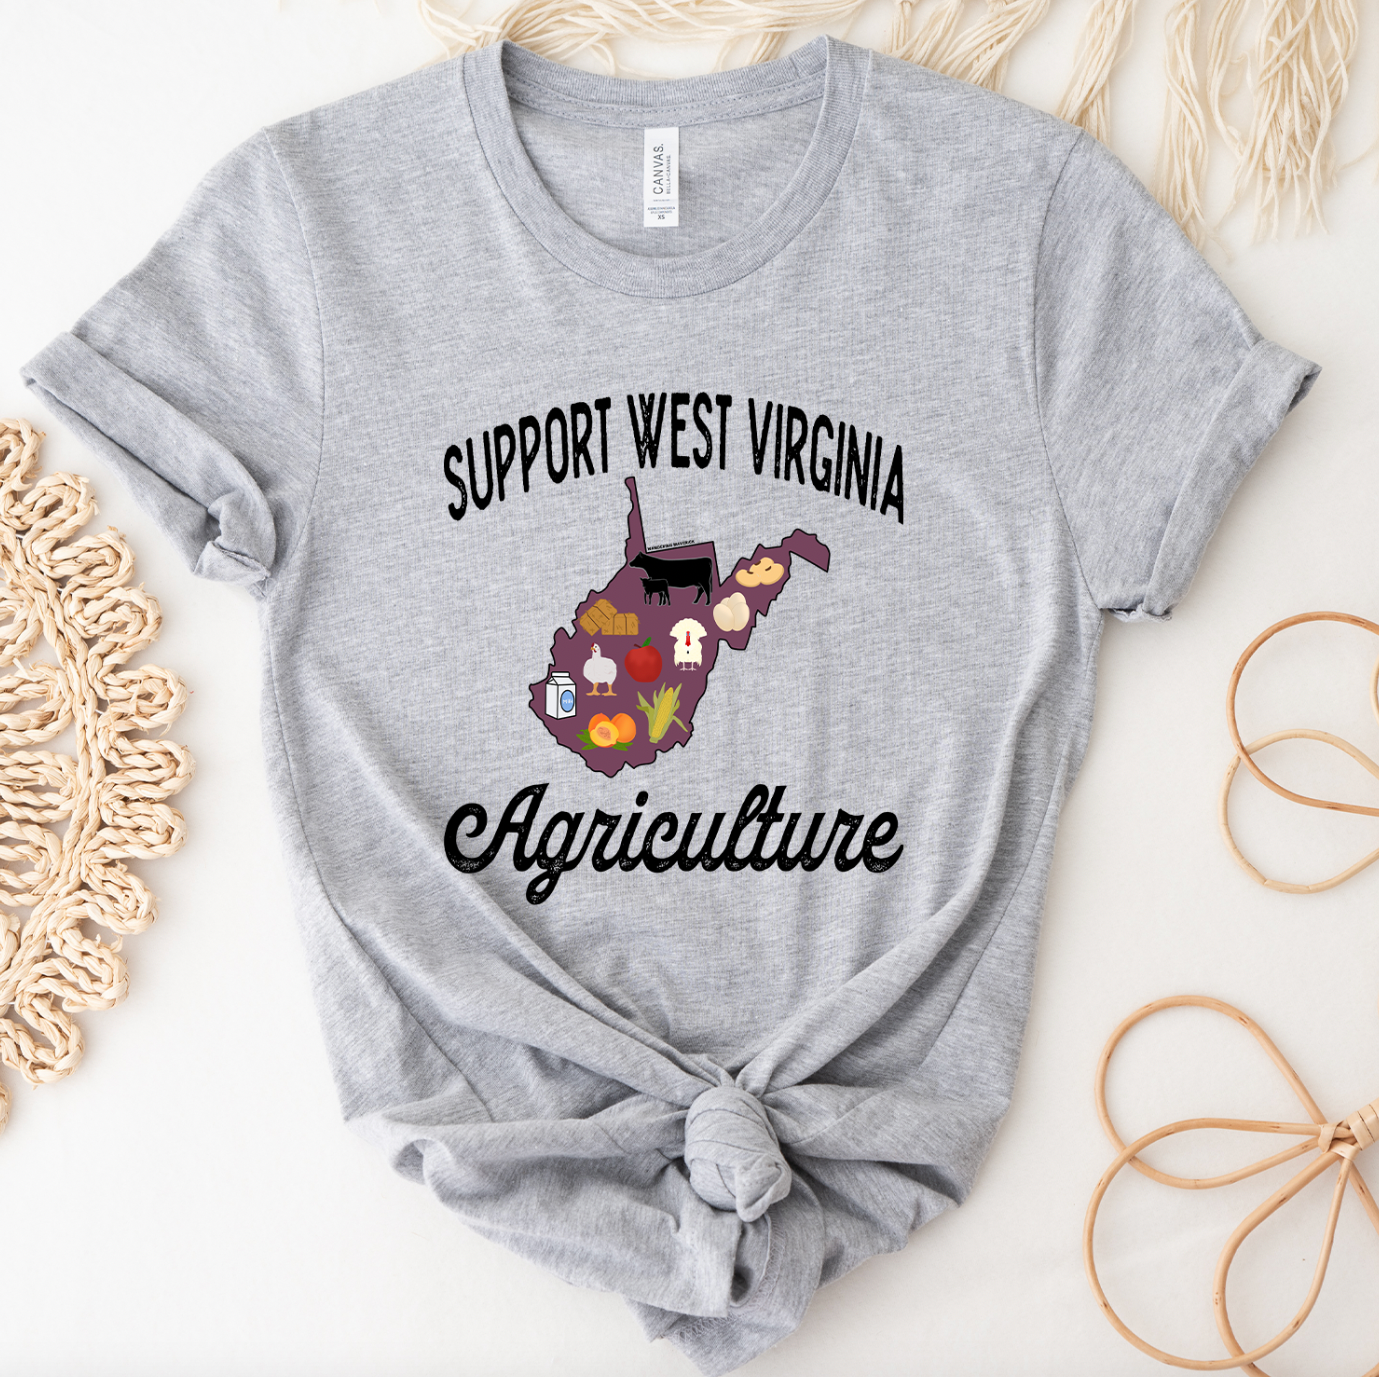 Support West Virginia Agriculture T-Shirt (XS-4XL) - Multiple Colors!